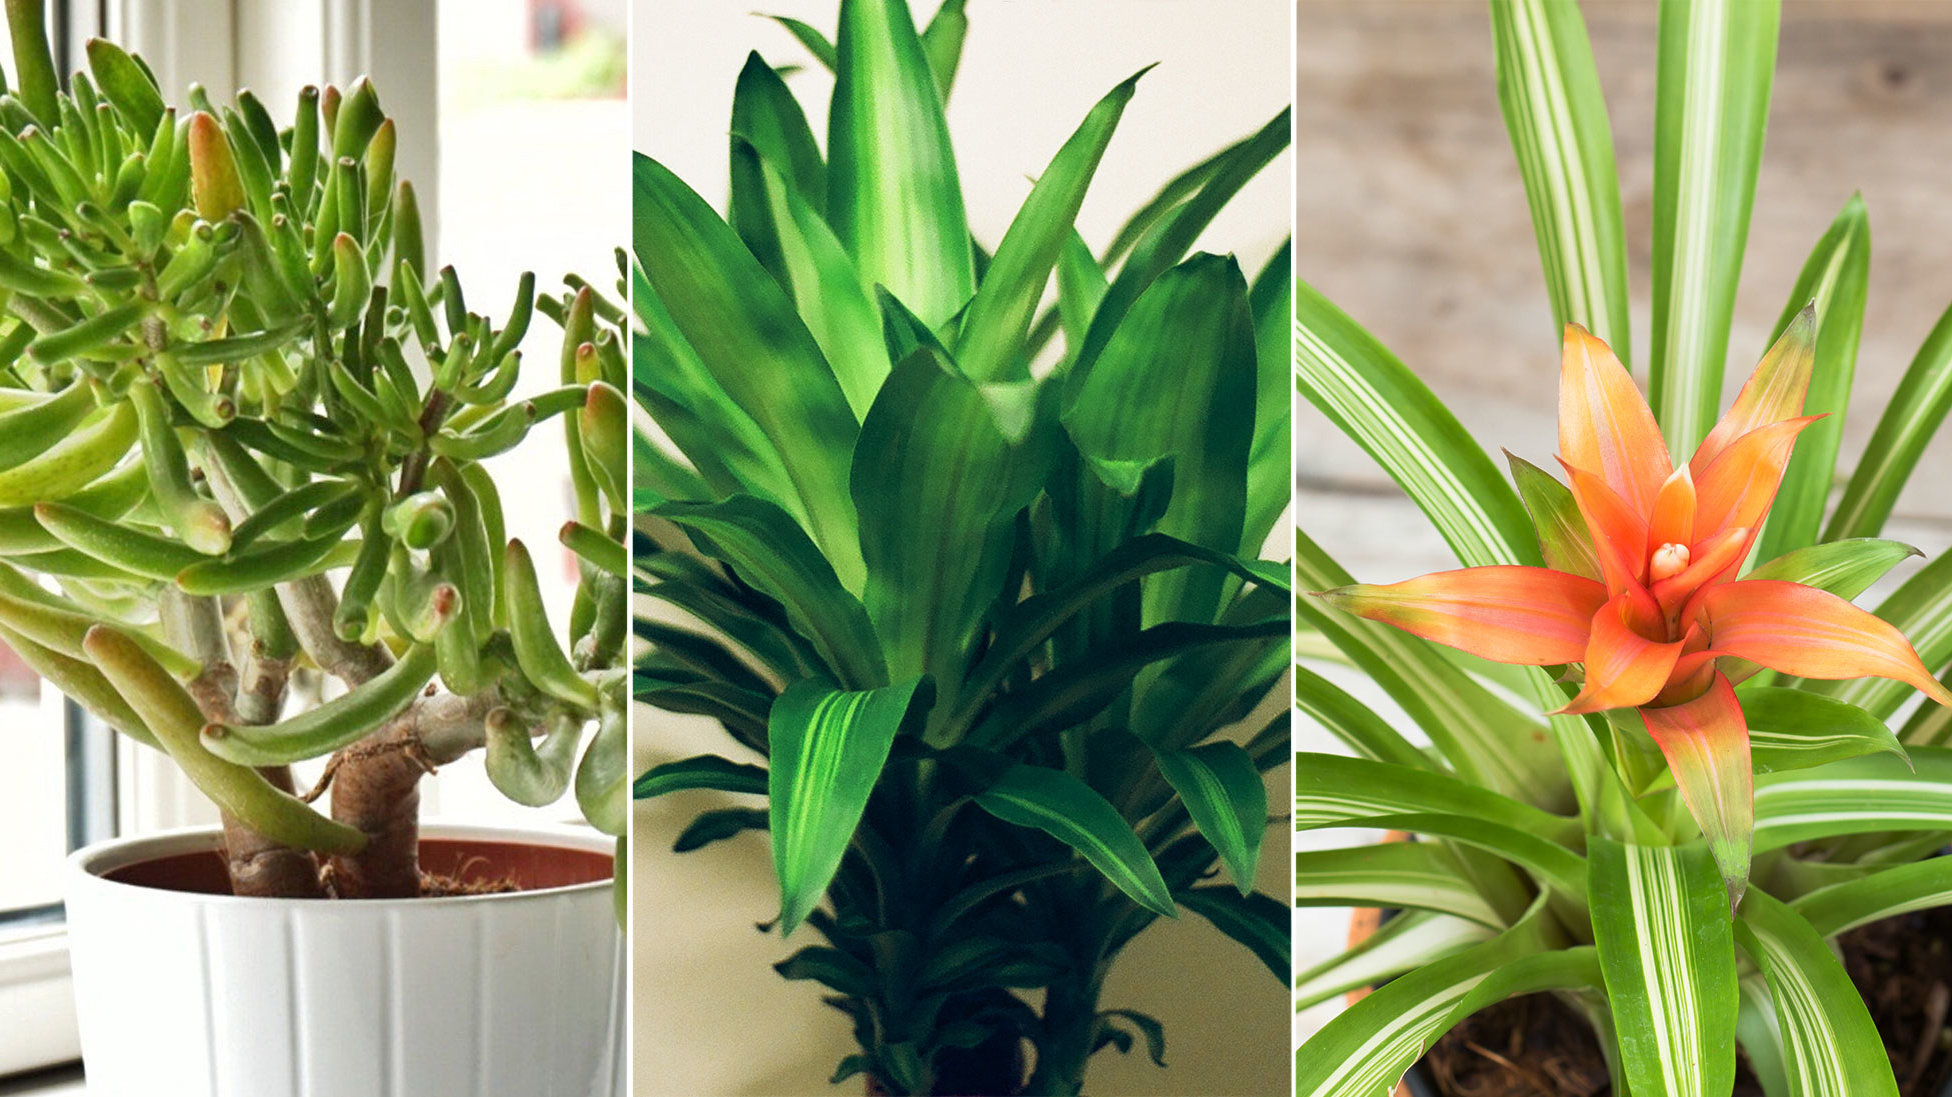 5 Plants That Can Help Purify Indoor Air